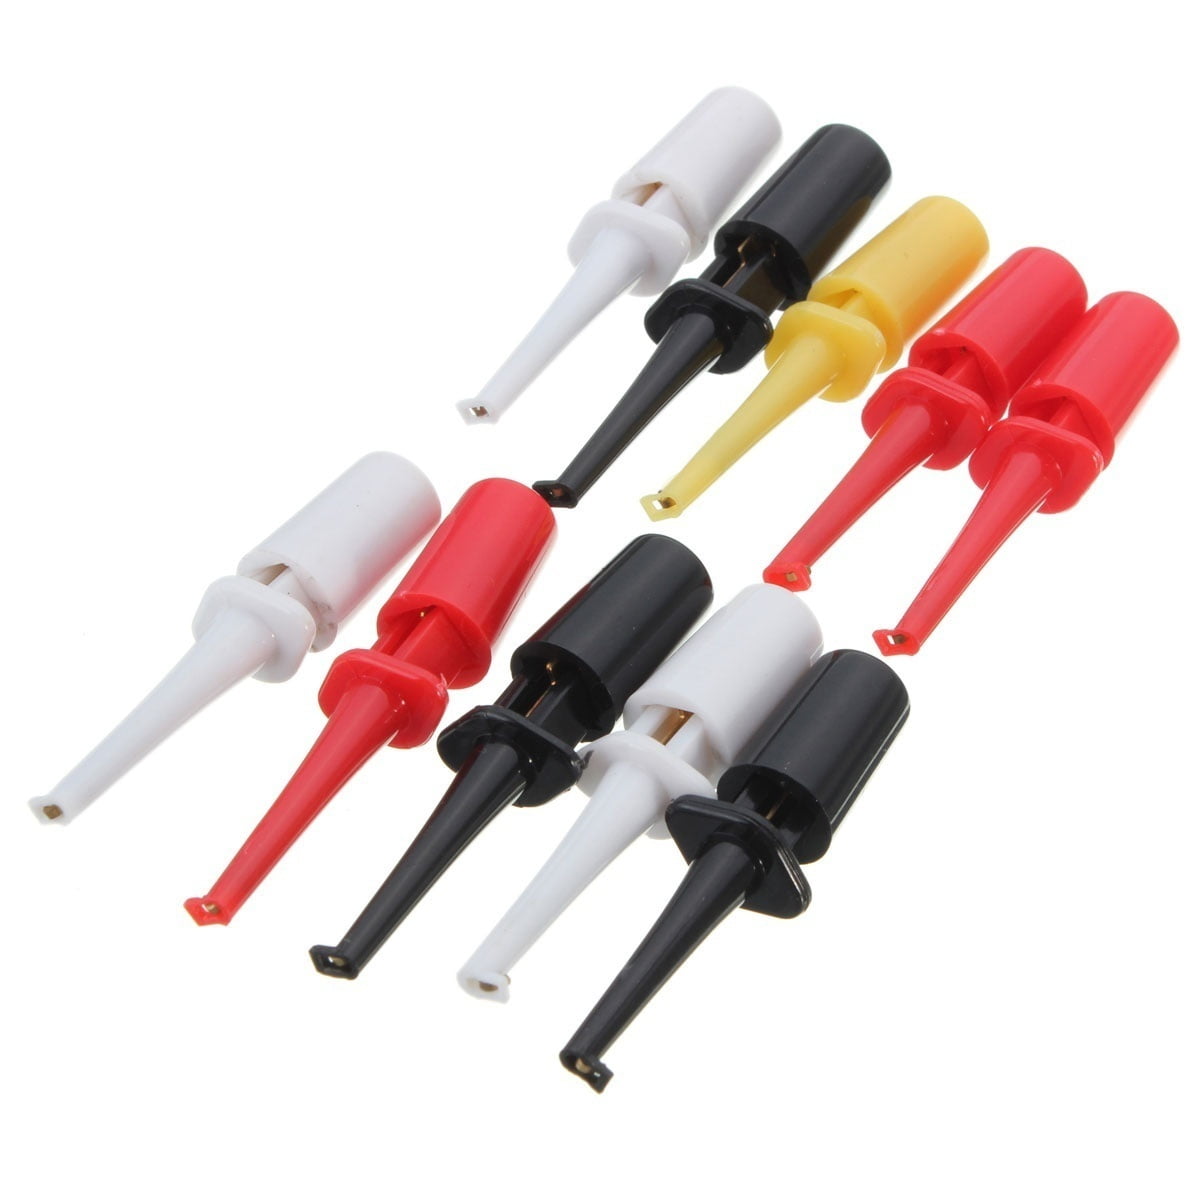 10PCS Multimeter Lead Wire Kit Hook Clip Grabbers Test Probe SMD IC Cable DIY 